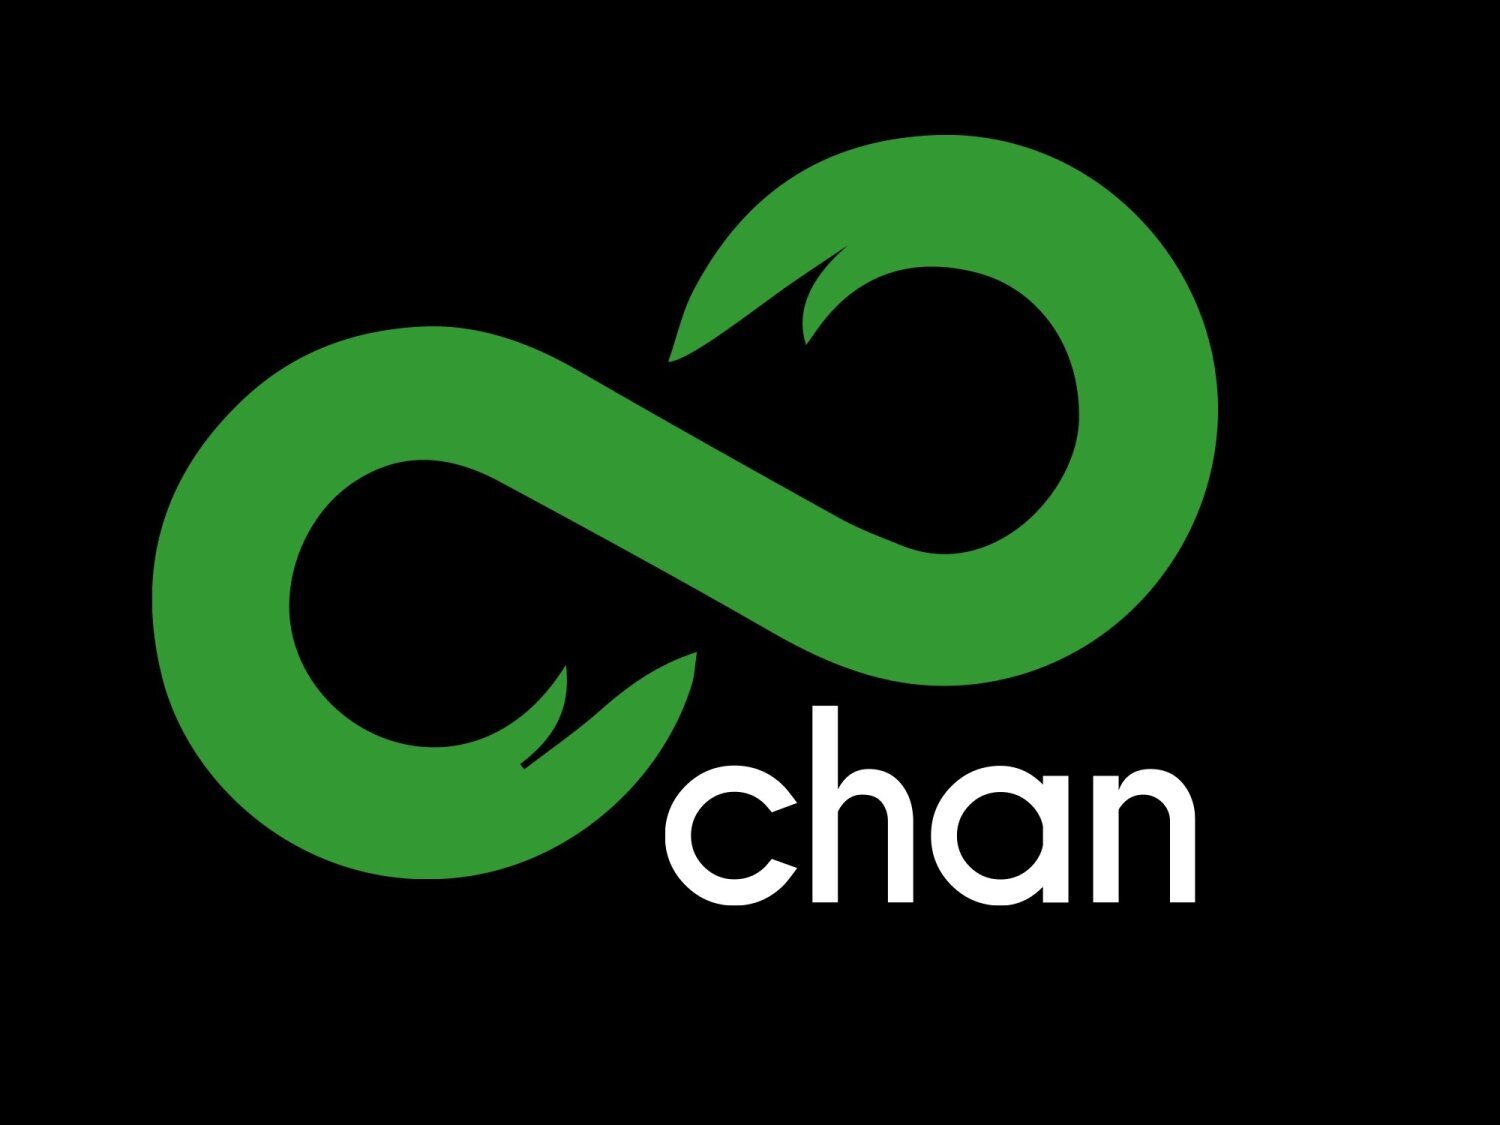 8chan Is Trying To Come Back As '8kun.' Its Founder Is Trying To